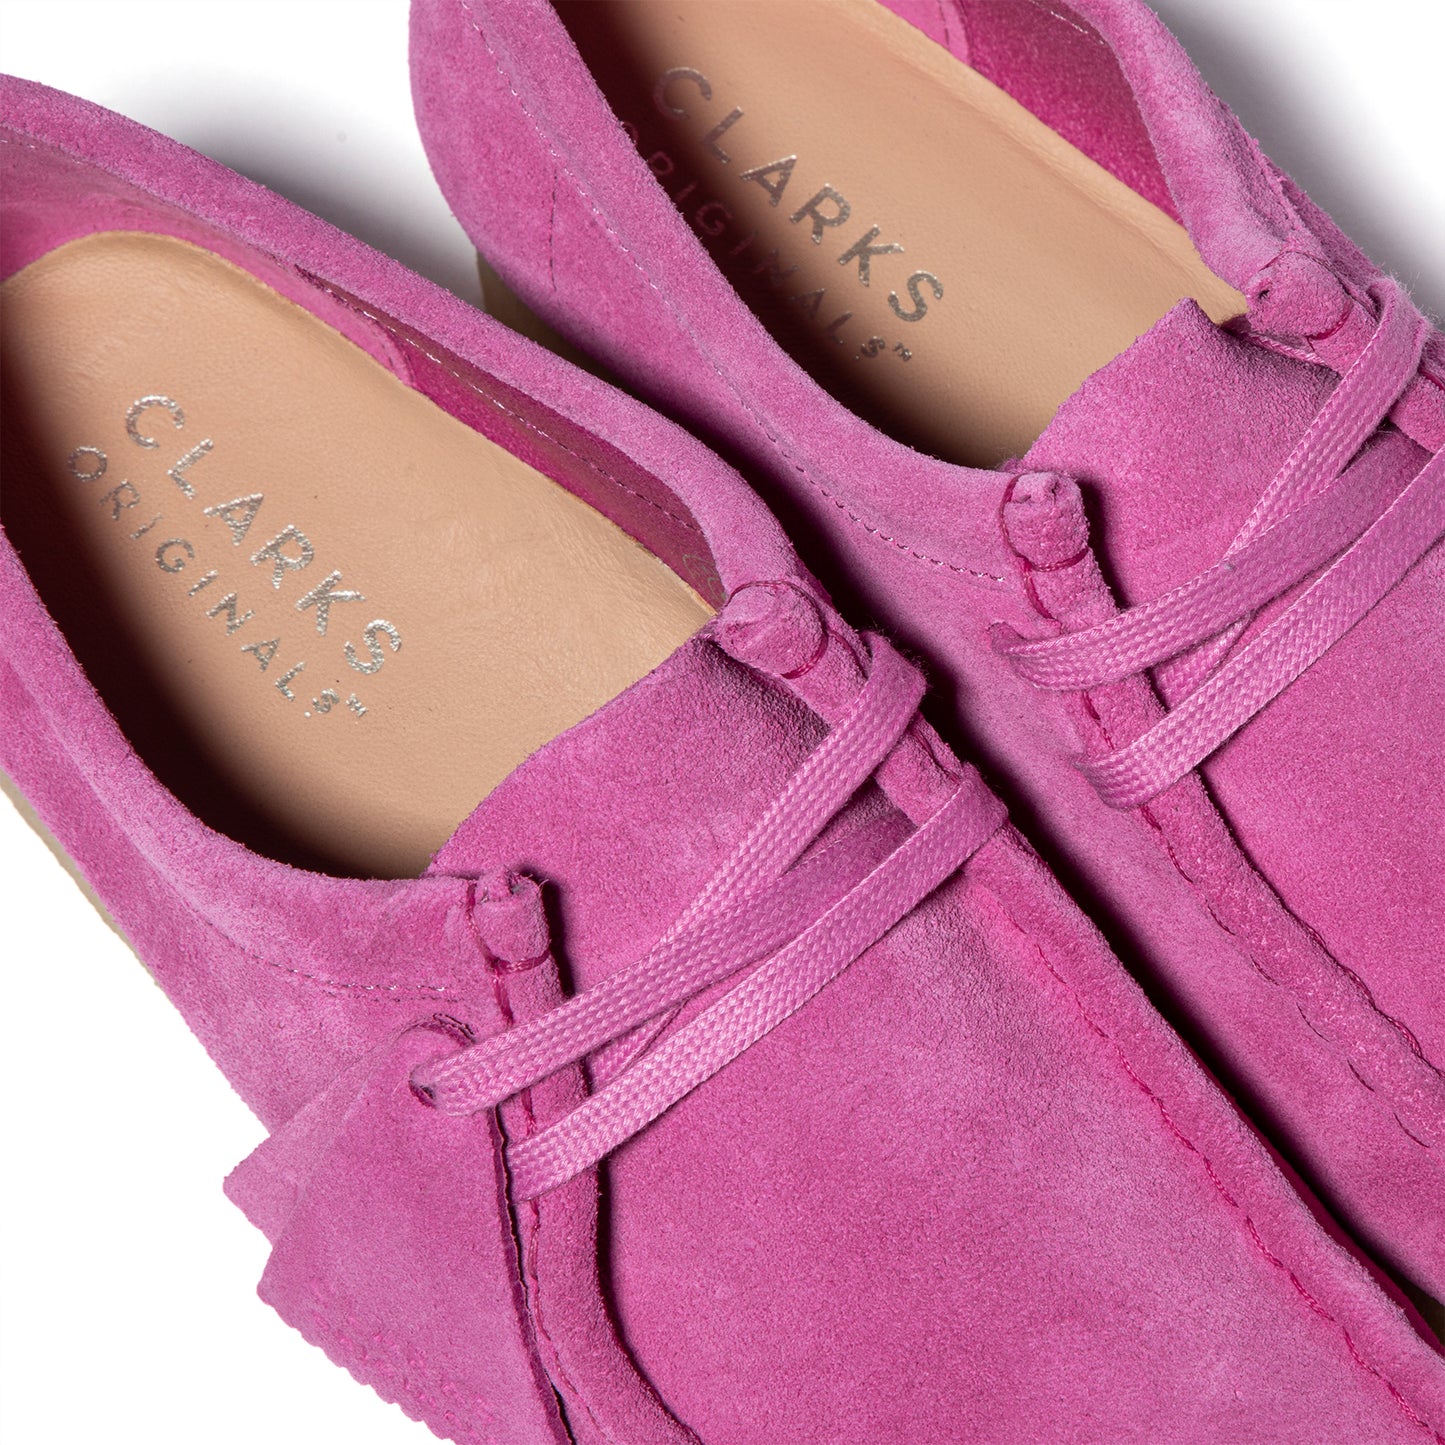 Clarks Wallabee (Pink Suede)